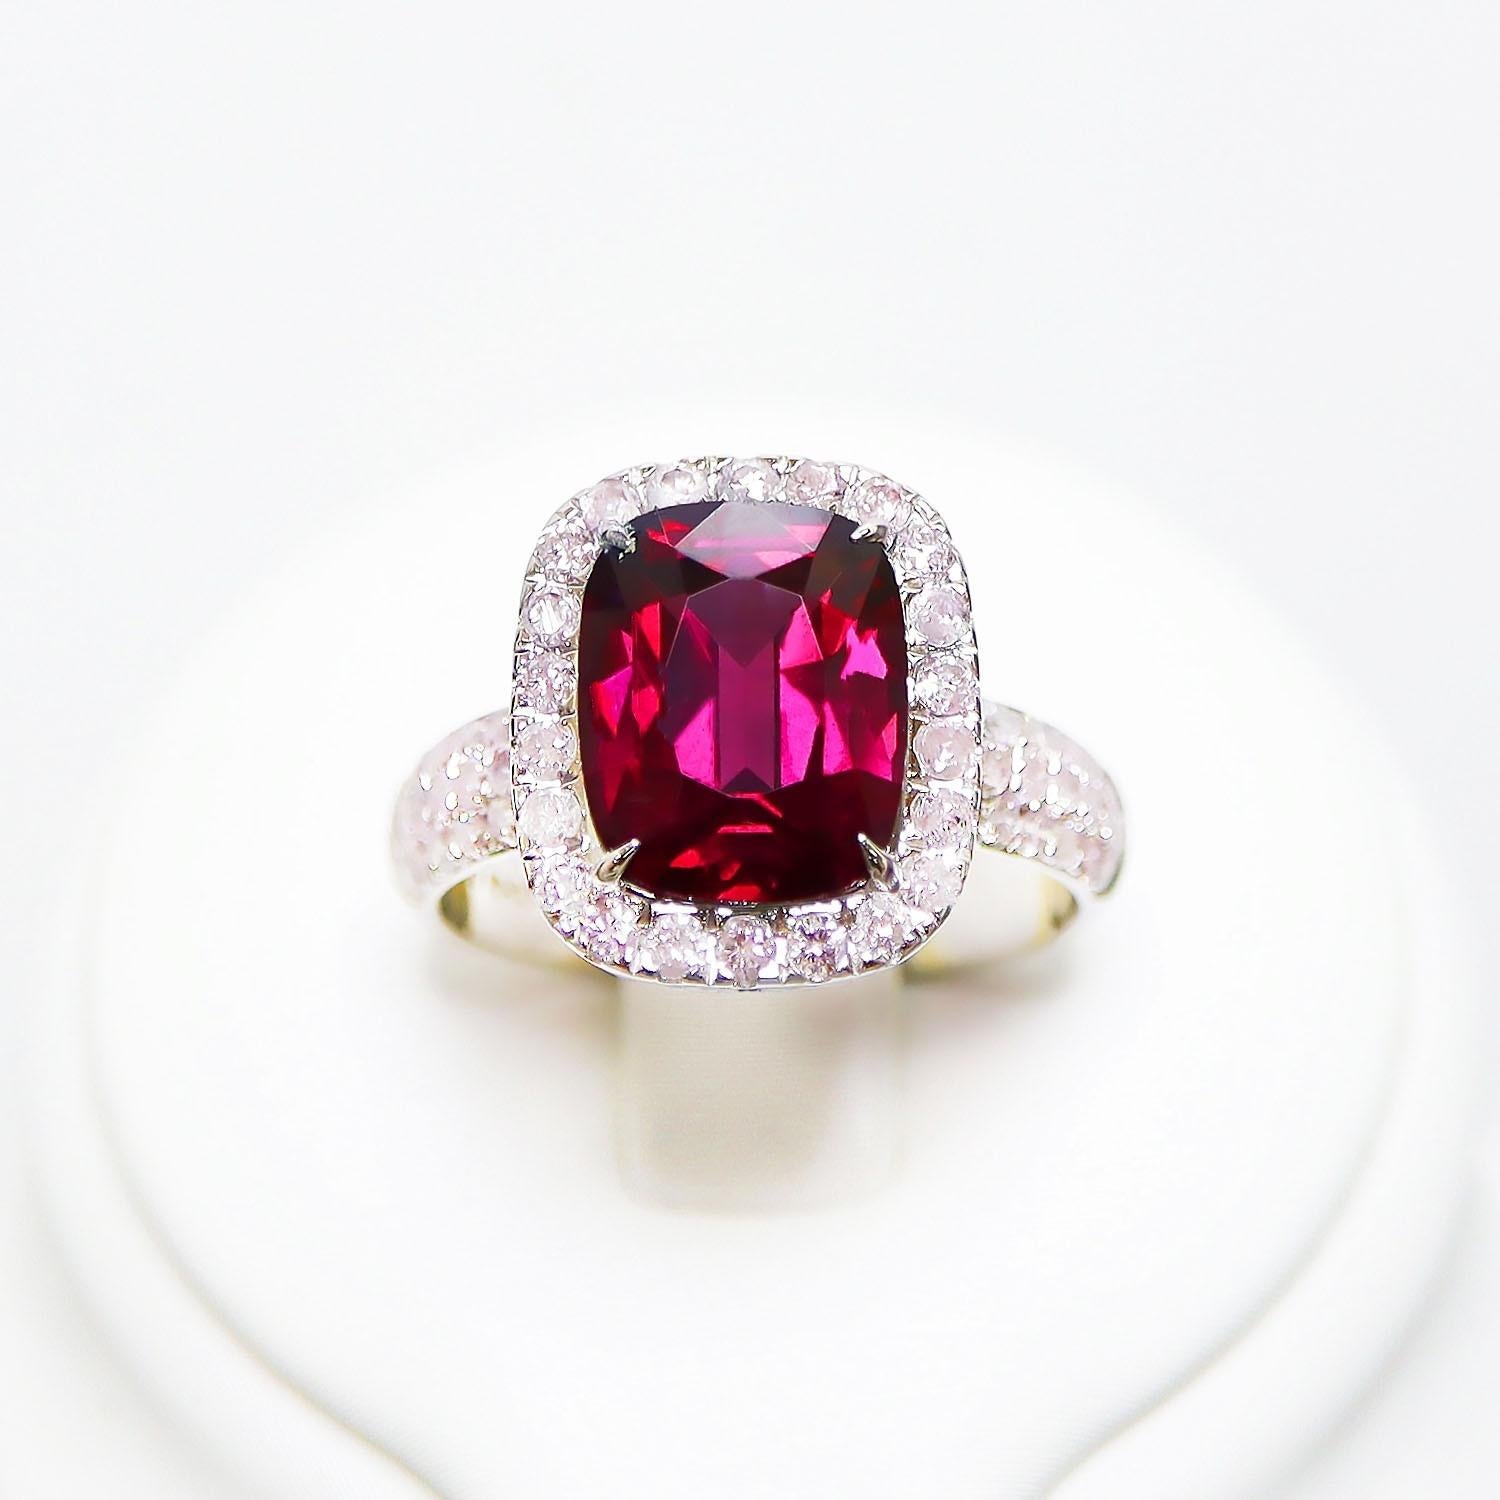 IGI 14K 3.72 Ct Red Garnet&Pink Diamonds Antique Art Deco Style Engagement Ring In New Condition For Sale In Kaohsiung City, TW